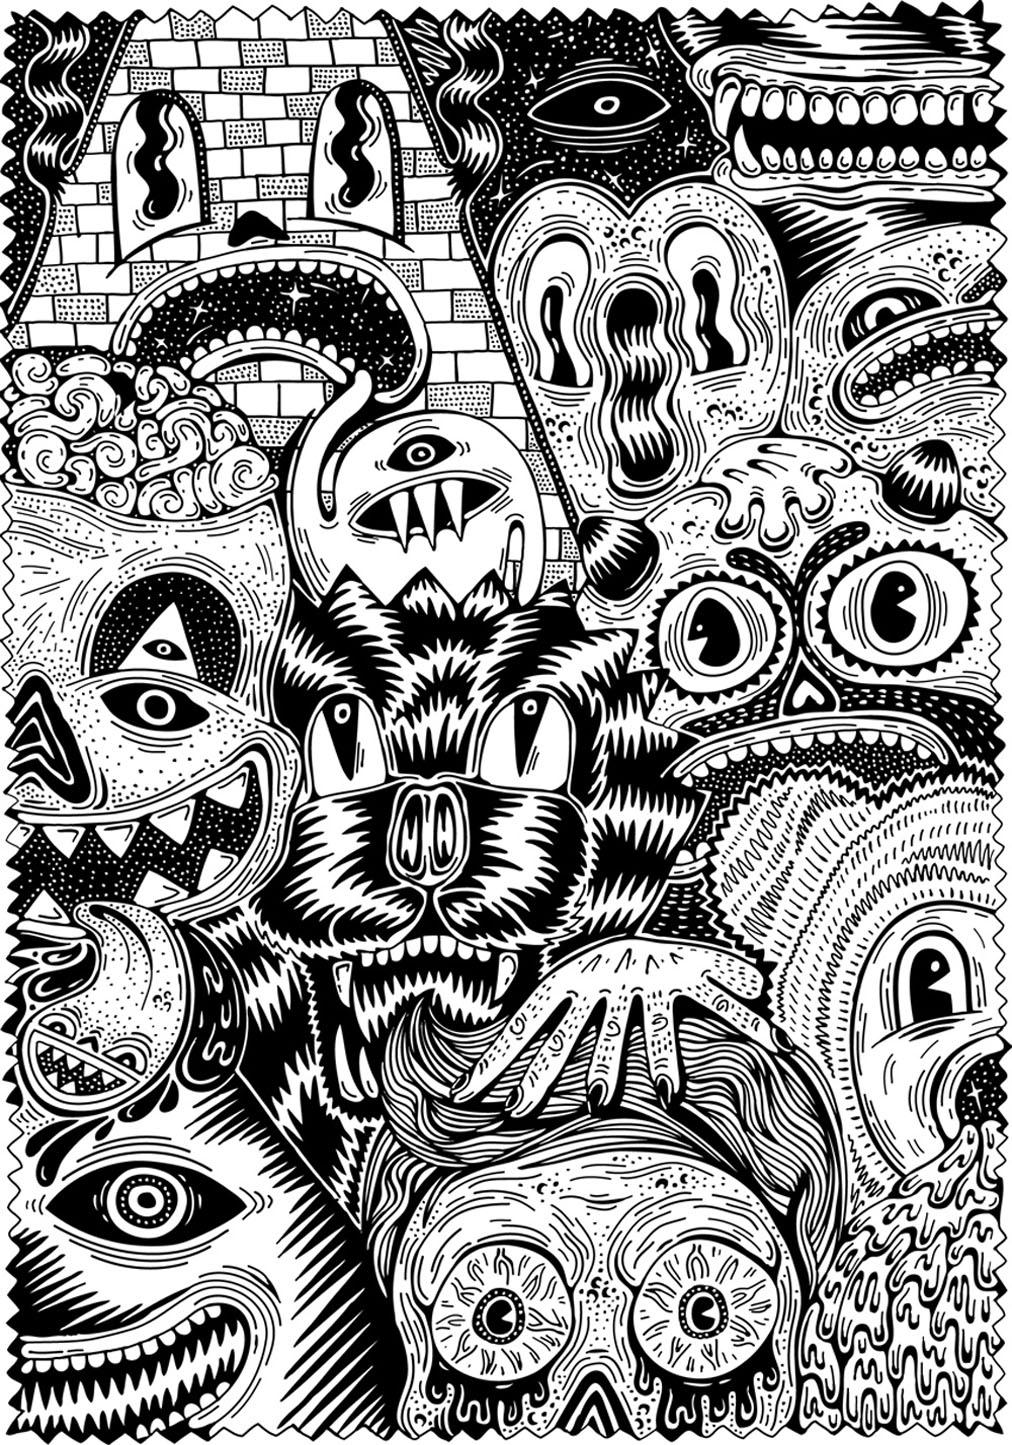 Halloween Coloring Page For Adults - Coloring Home